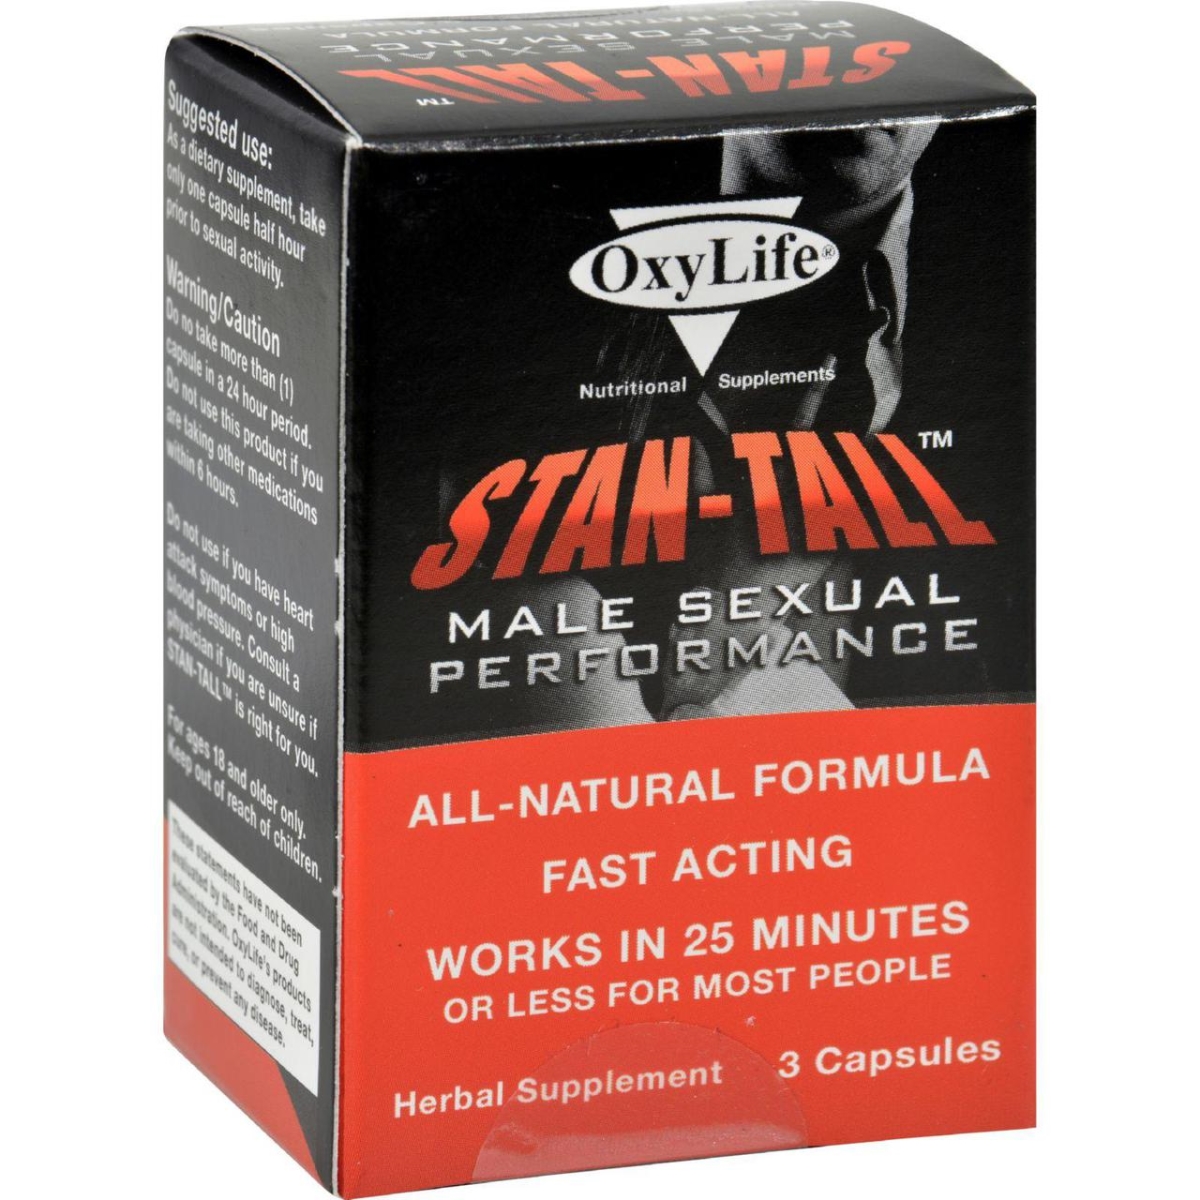 Hg1064237 Oxylife Stan-tall Male Sexual Performance - 3 Capsules